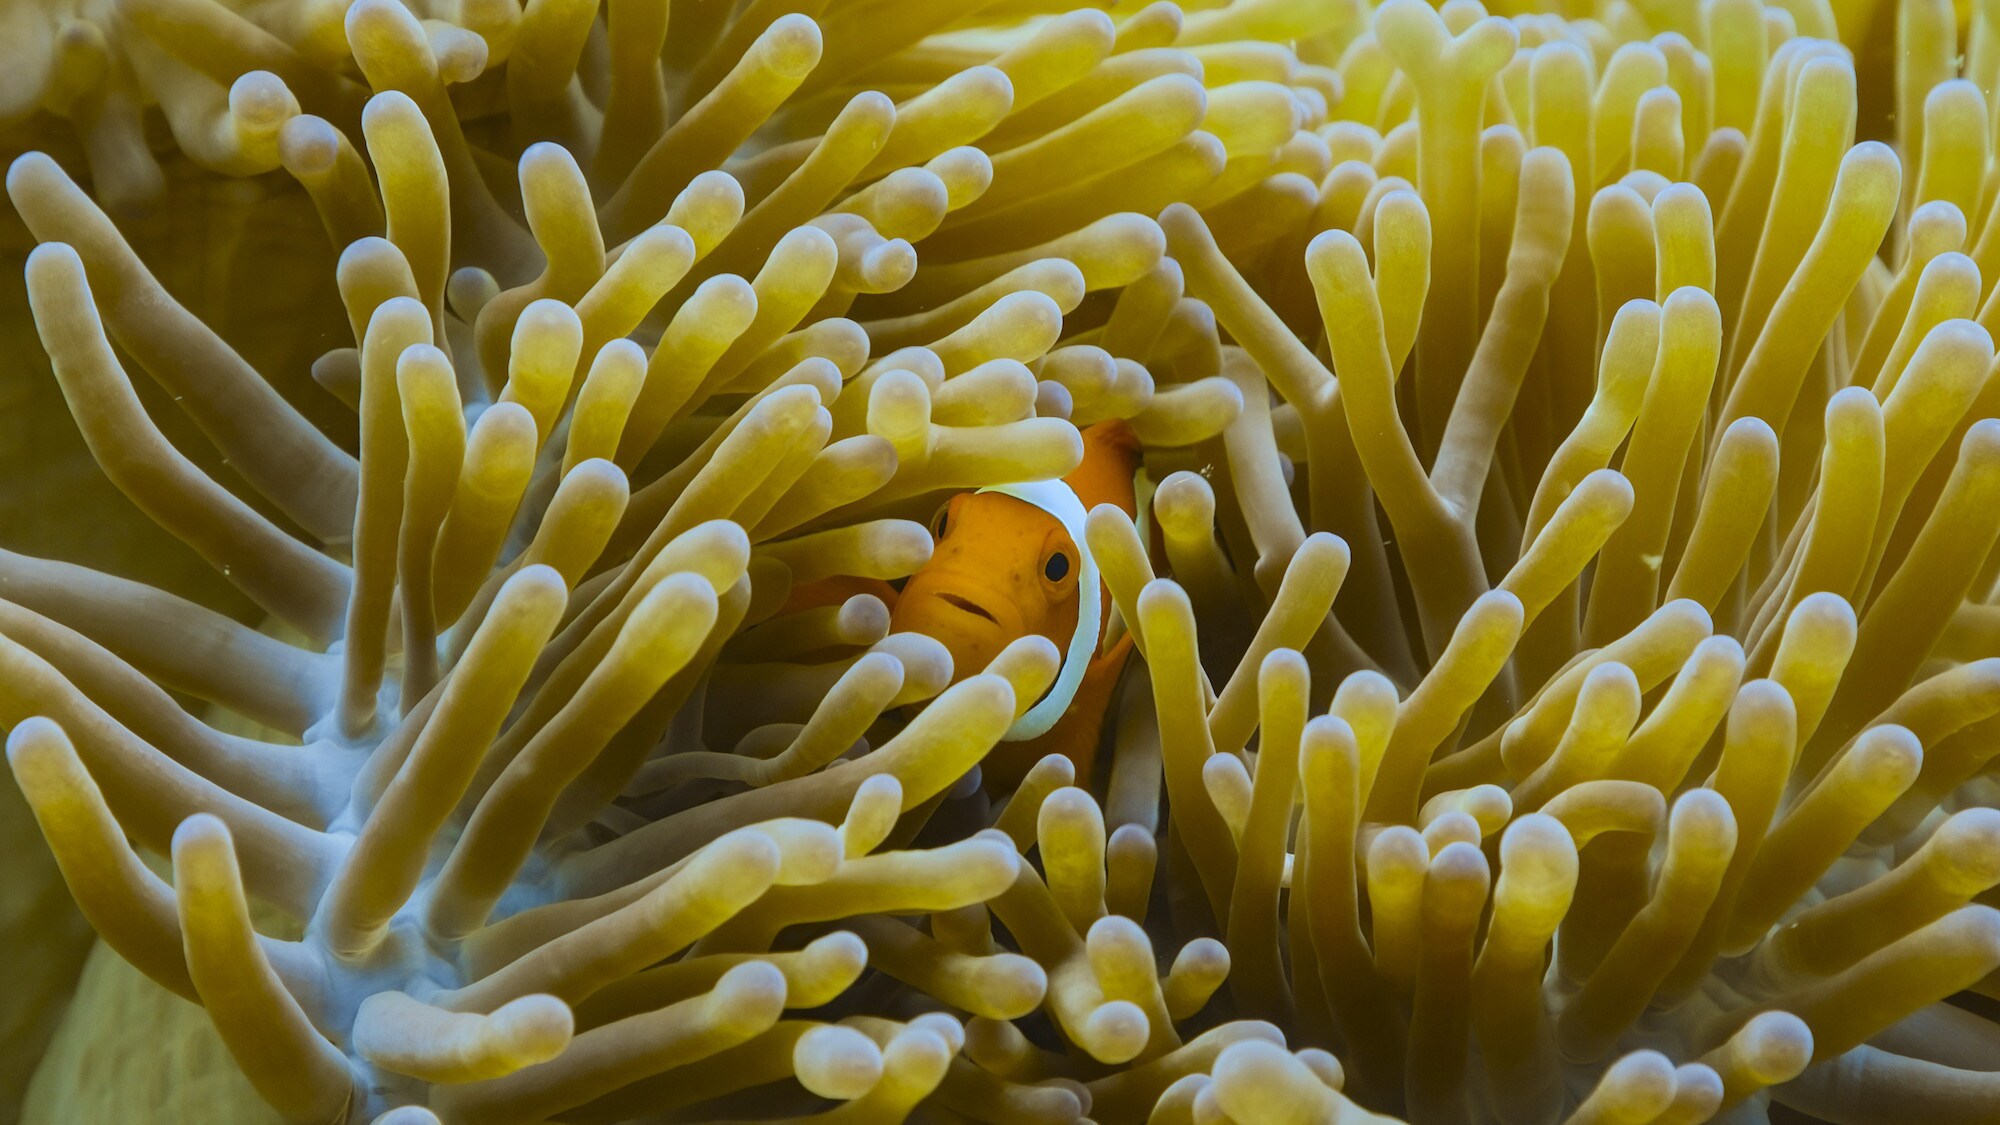 Clown fish amongst coral. (National Geographic for Disney+/Bertie Gregory)